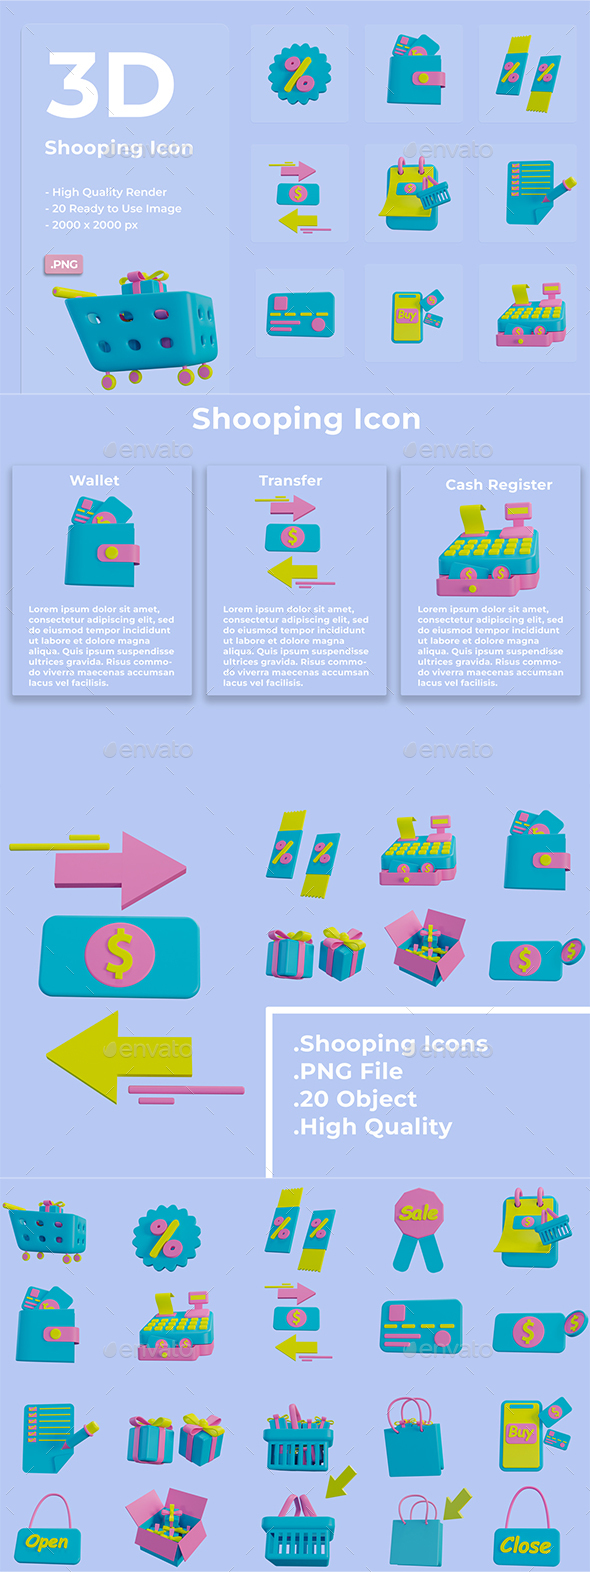 [DOWNLOAD]3D Shopping Icon